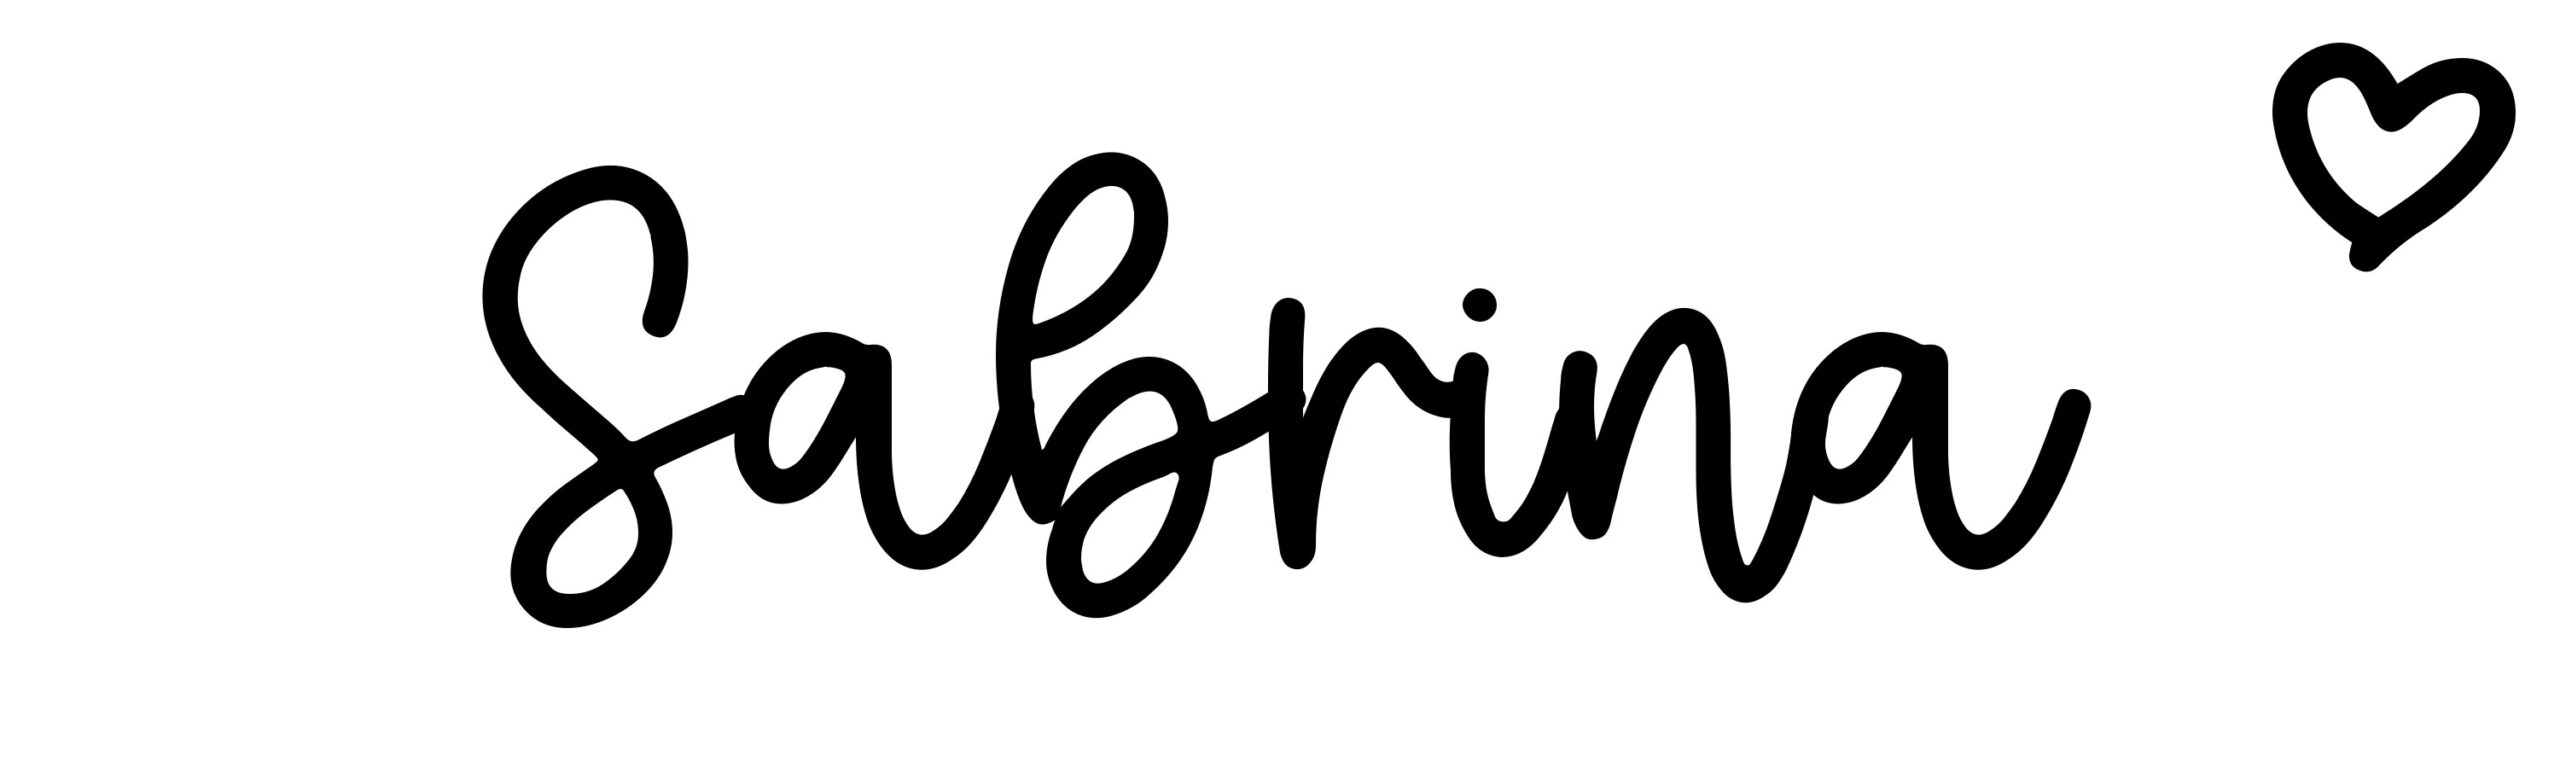 Sabrina - Name meaning, origin, variations and more